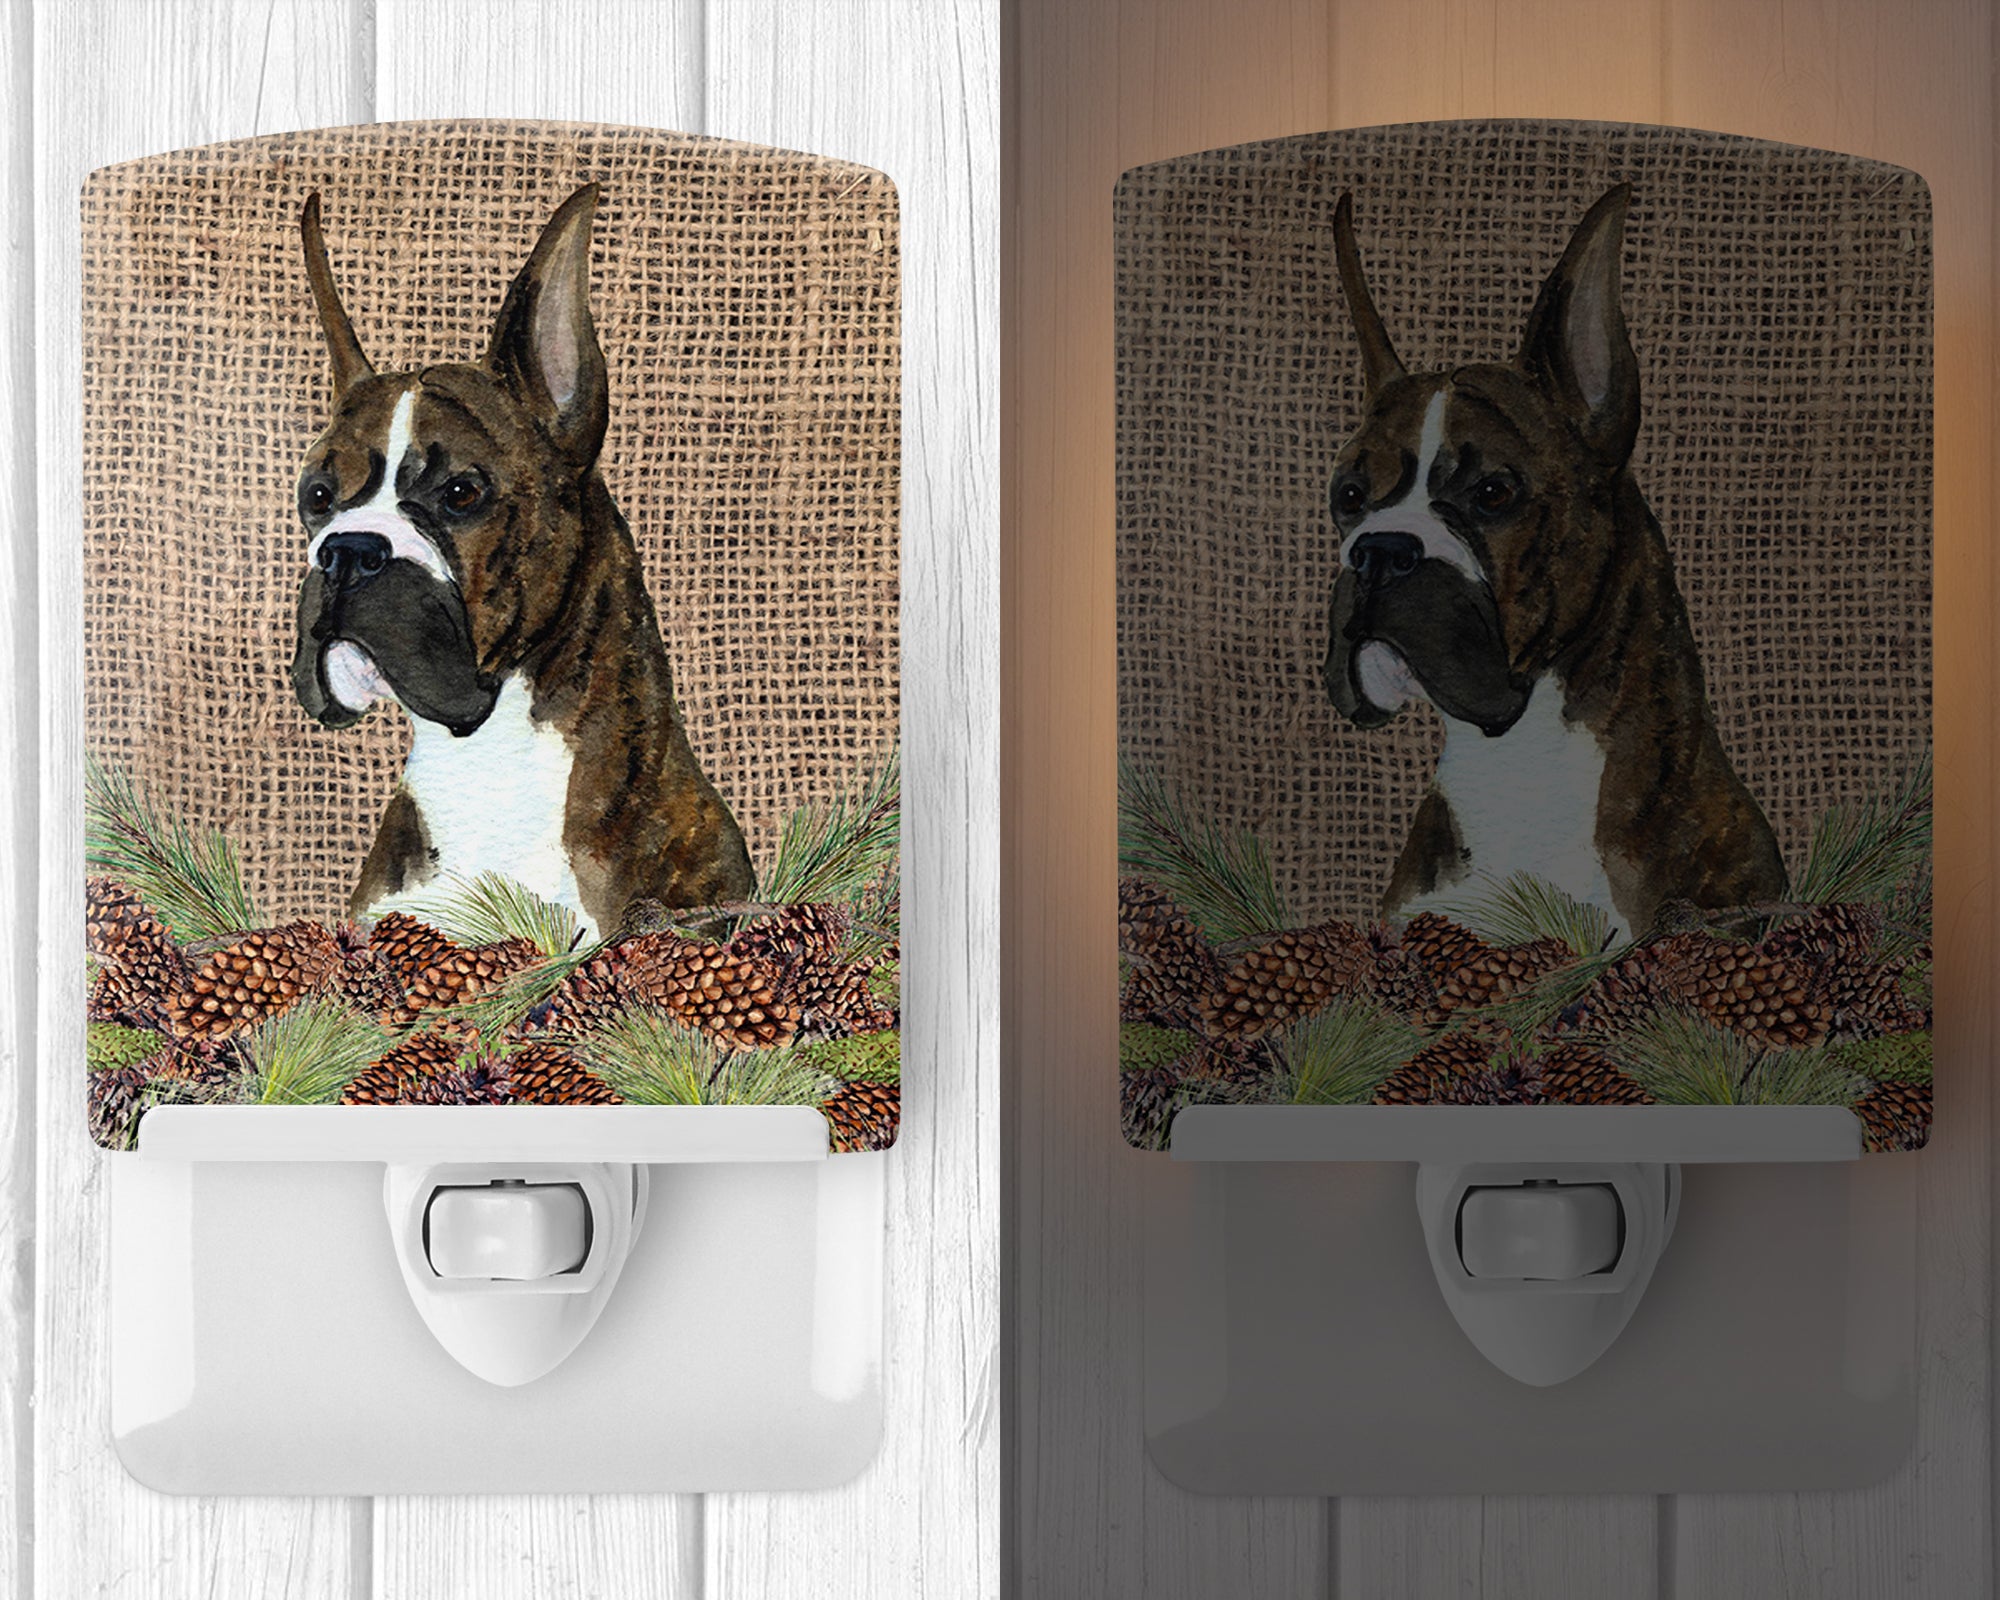 Brindle Boxer on Faux Burlap with Pine Cones Ceramic Night Light SS4097CNL - the-store.com